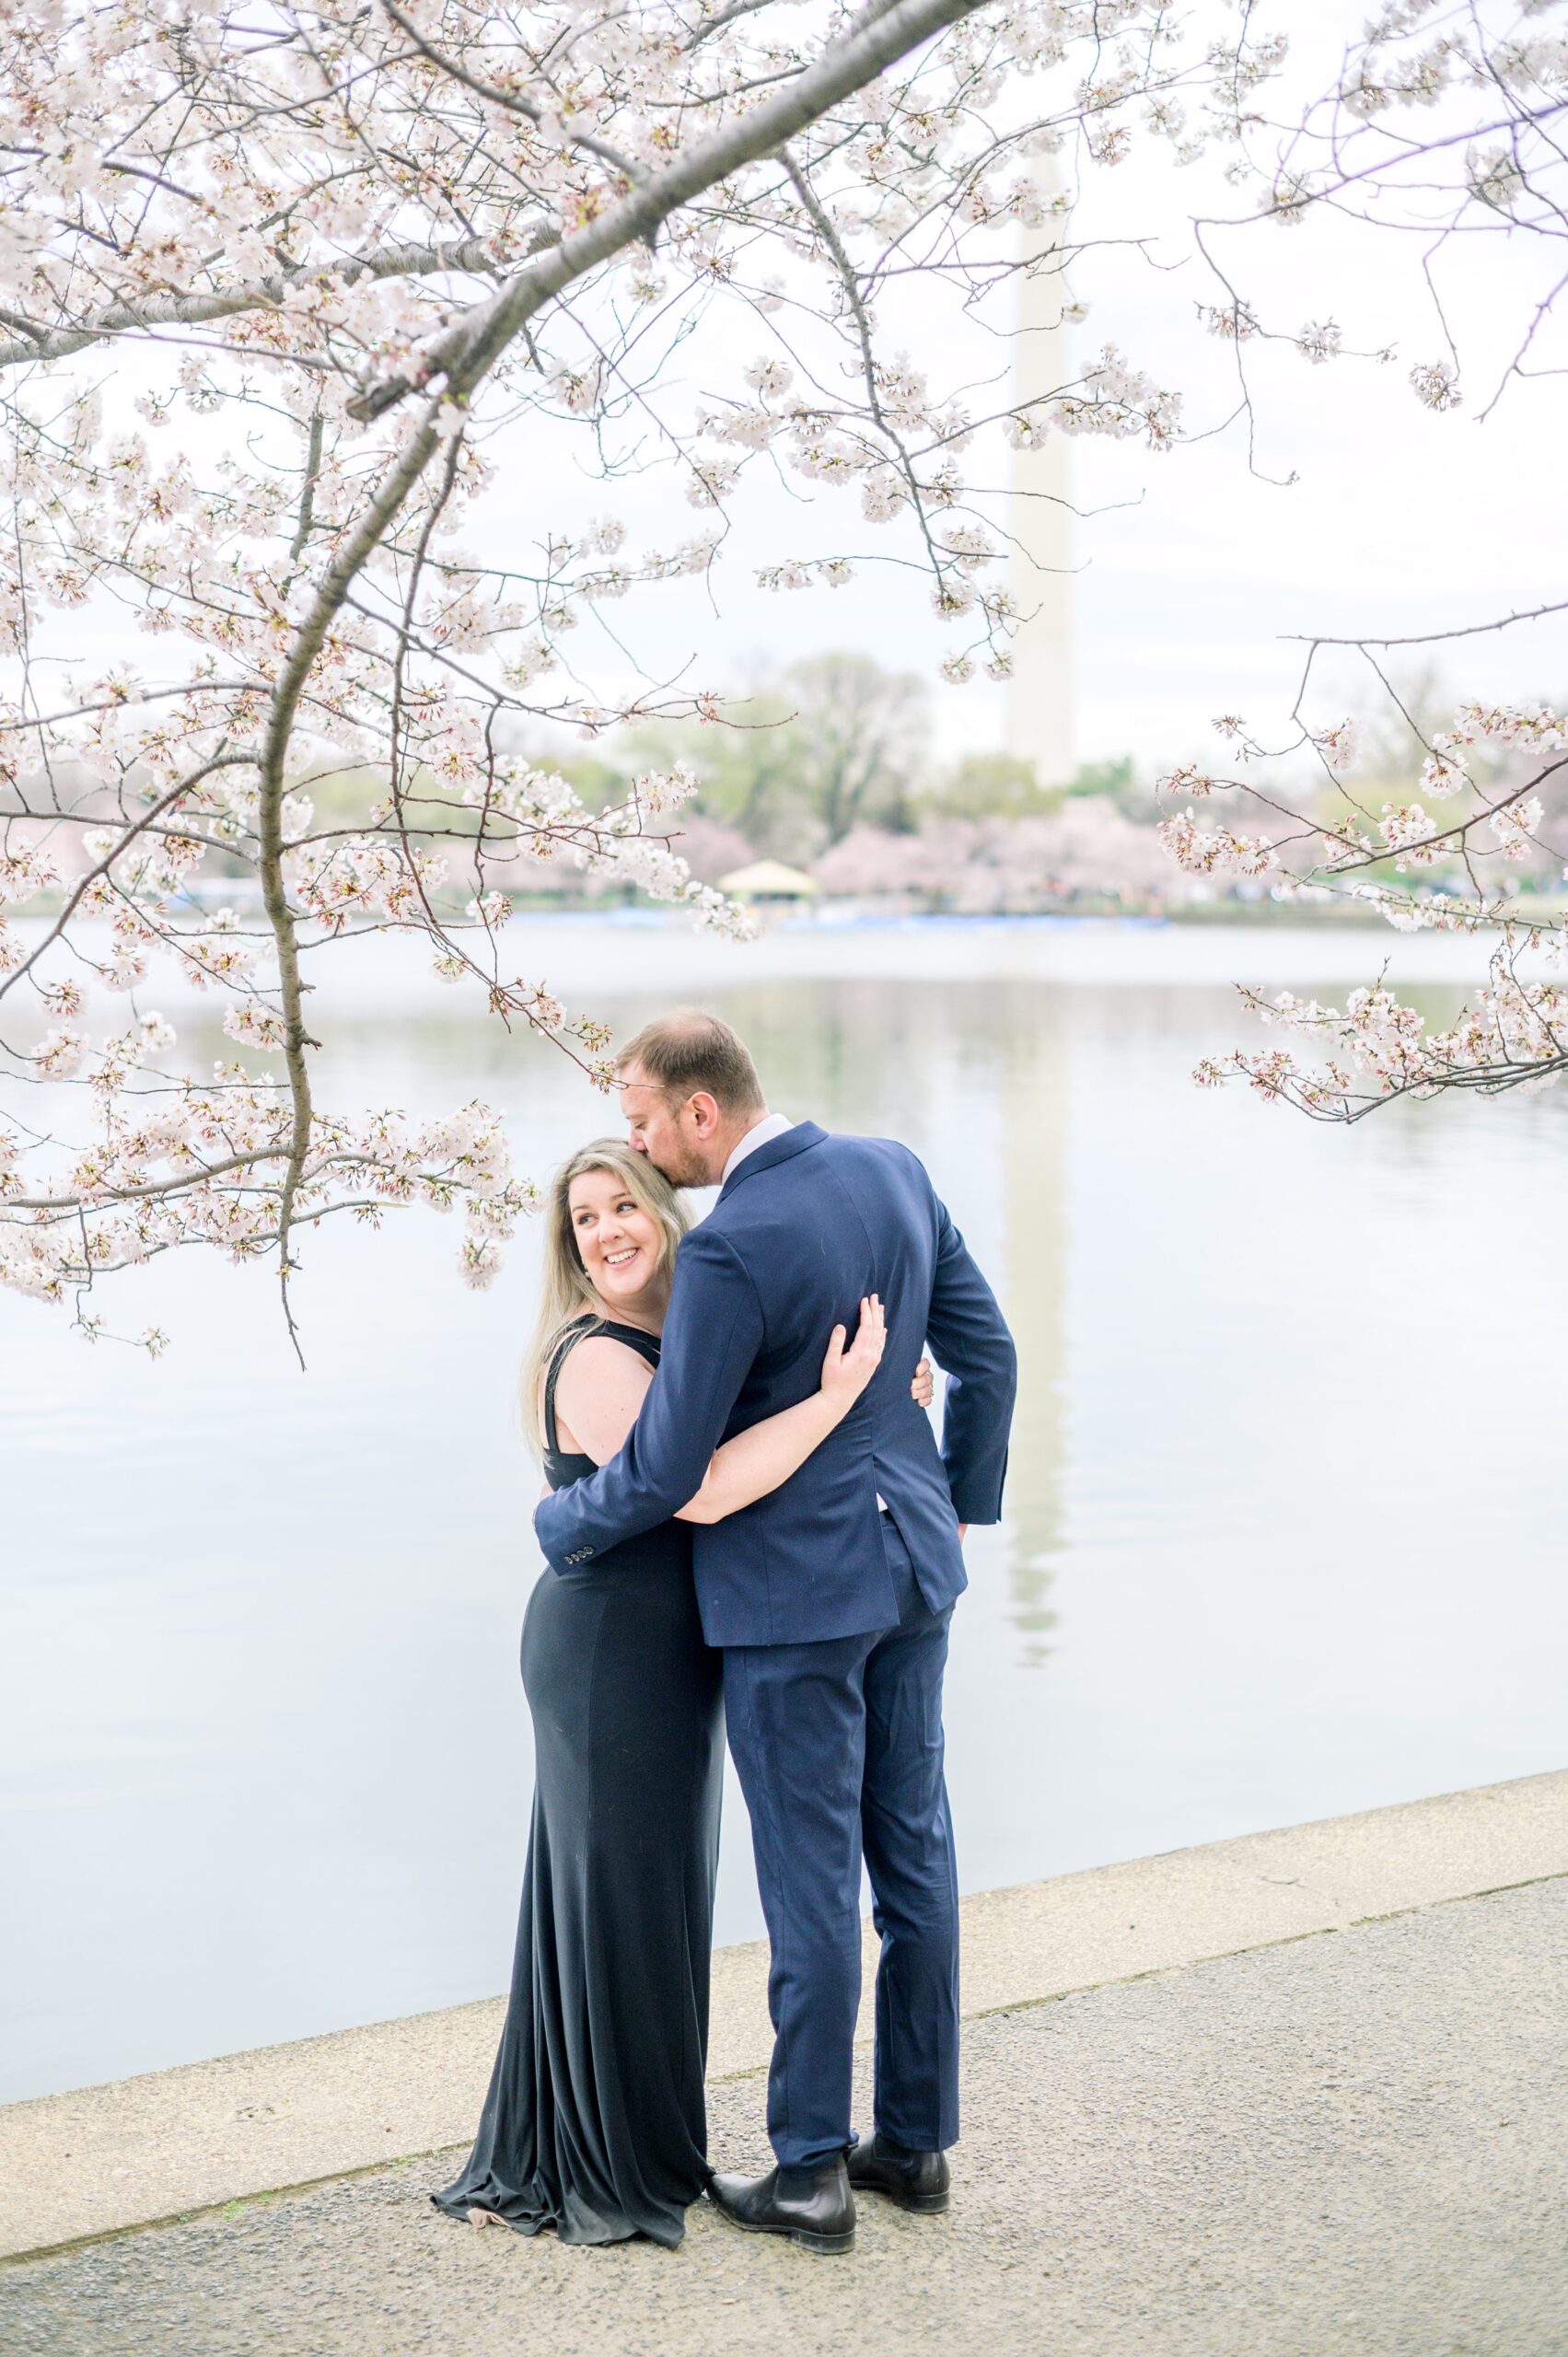 Cherry Blossom portrait session at the Jefferson Memorial in Washington DC photographed by Baltimore Wedding Photographer Cait Kramer Photography